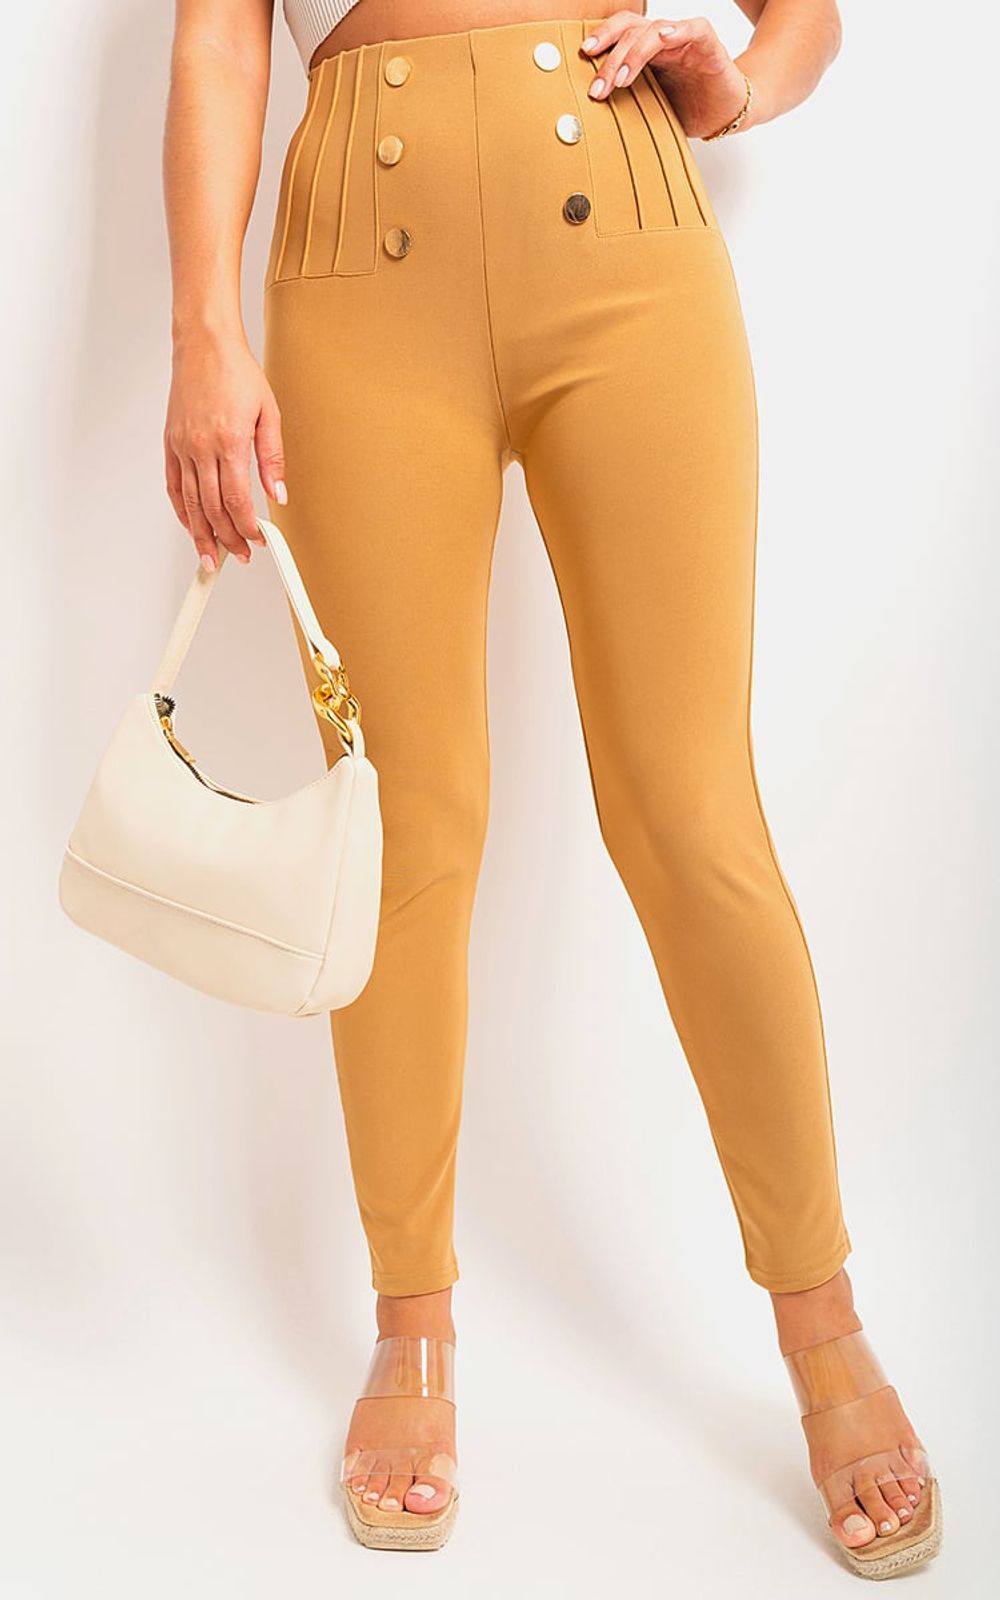 Women's High Waisted Trousers With Button Detail